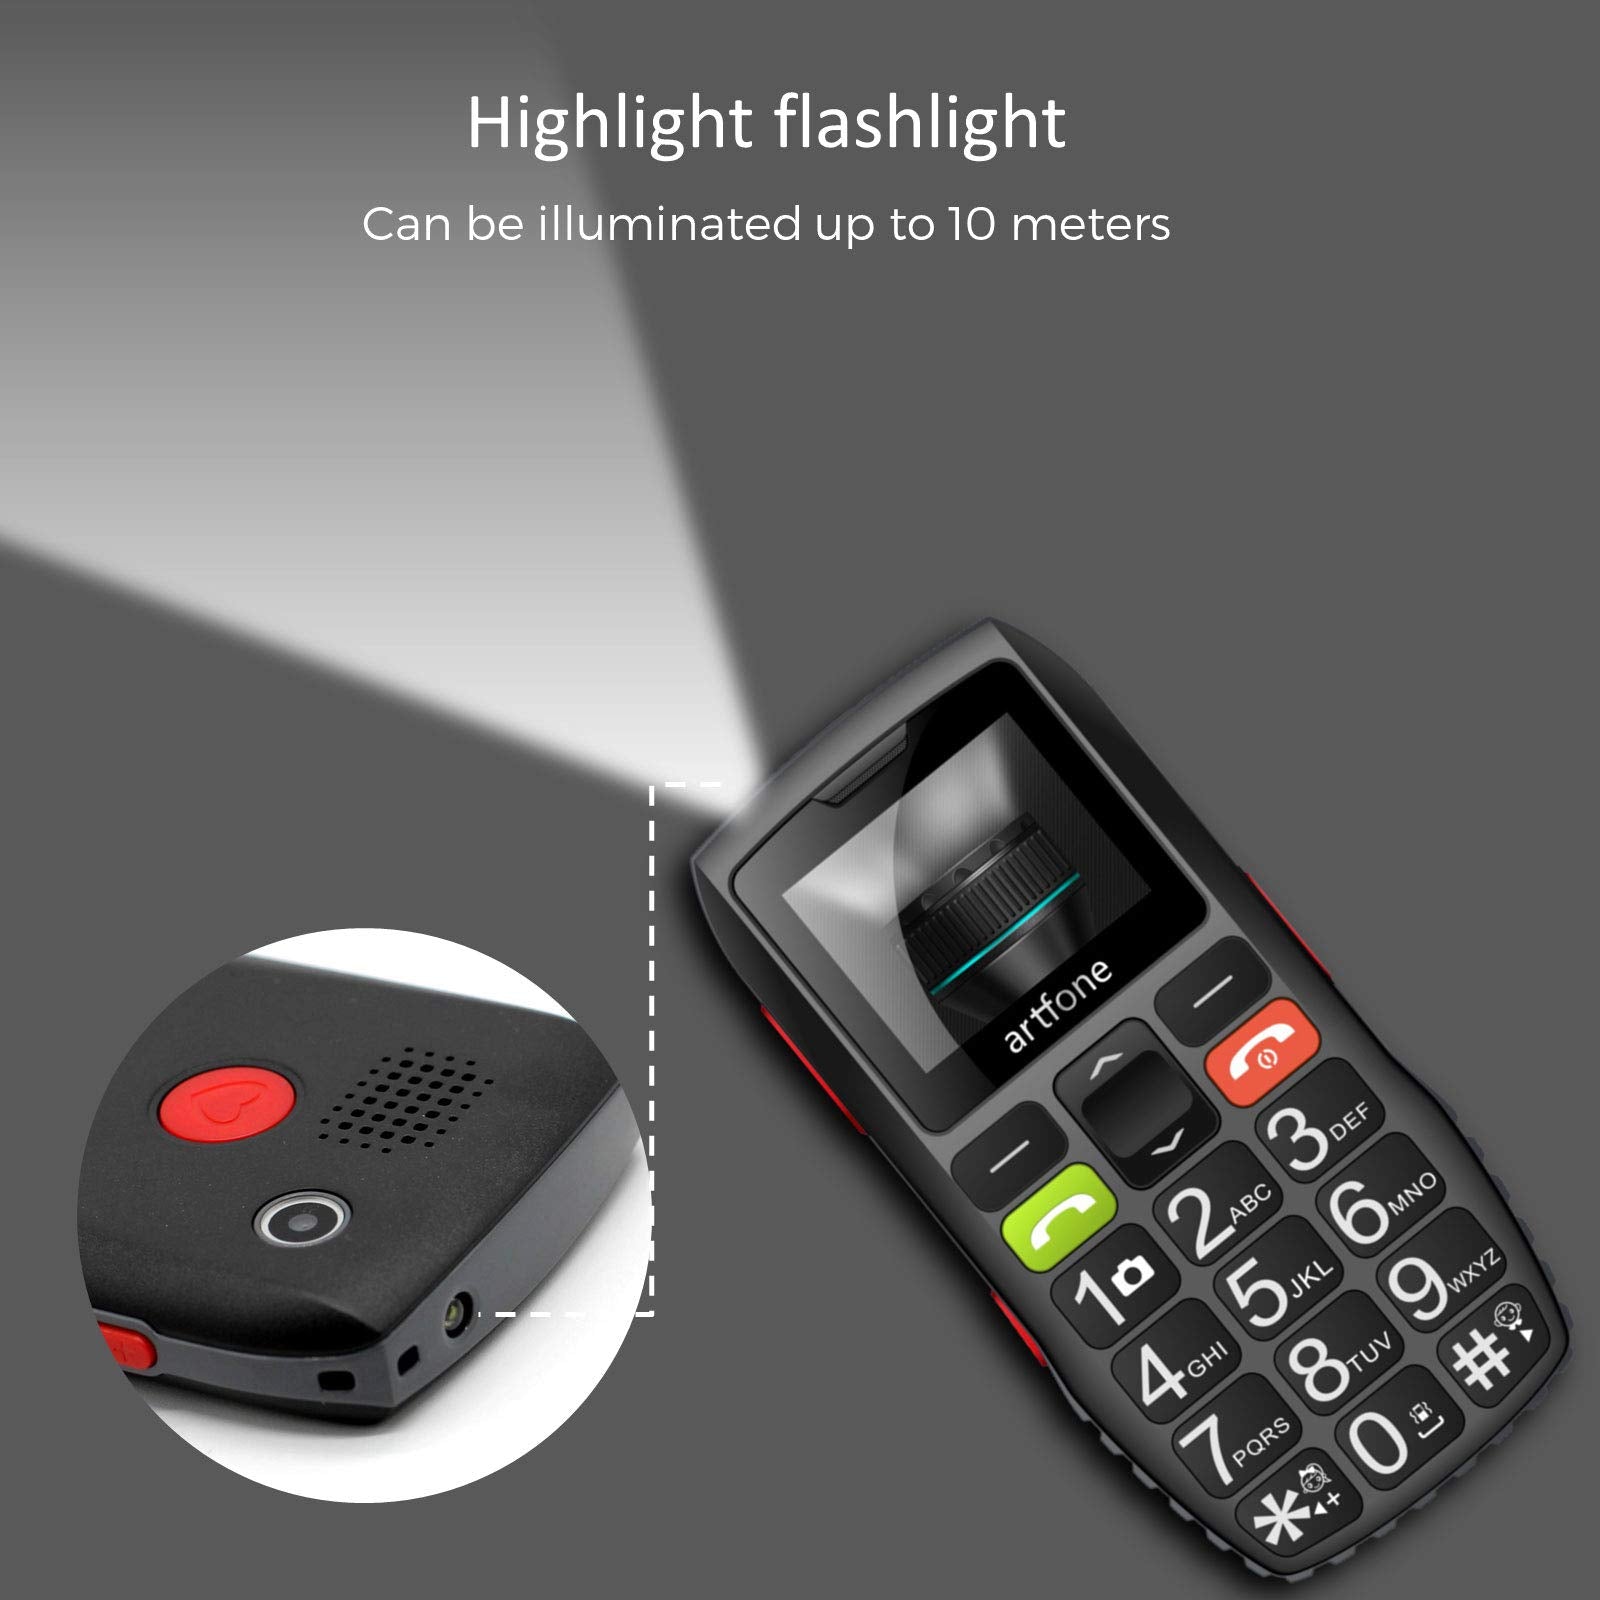 Artfone C1 Big Button Mobile Phone for Elderly, Unlocked Senior Mobile Phone With SOS Emergency Button,1400mAh Battery